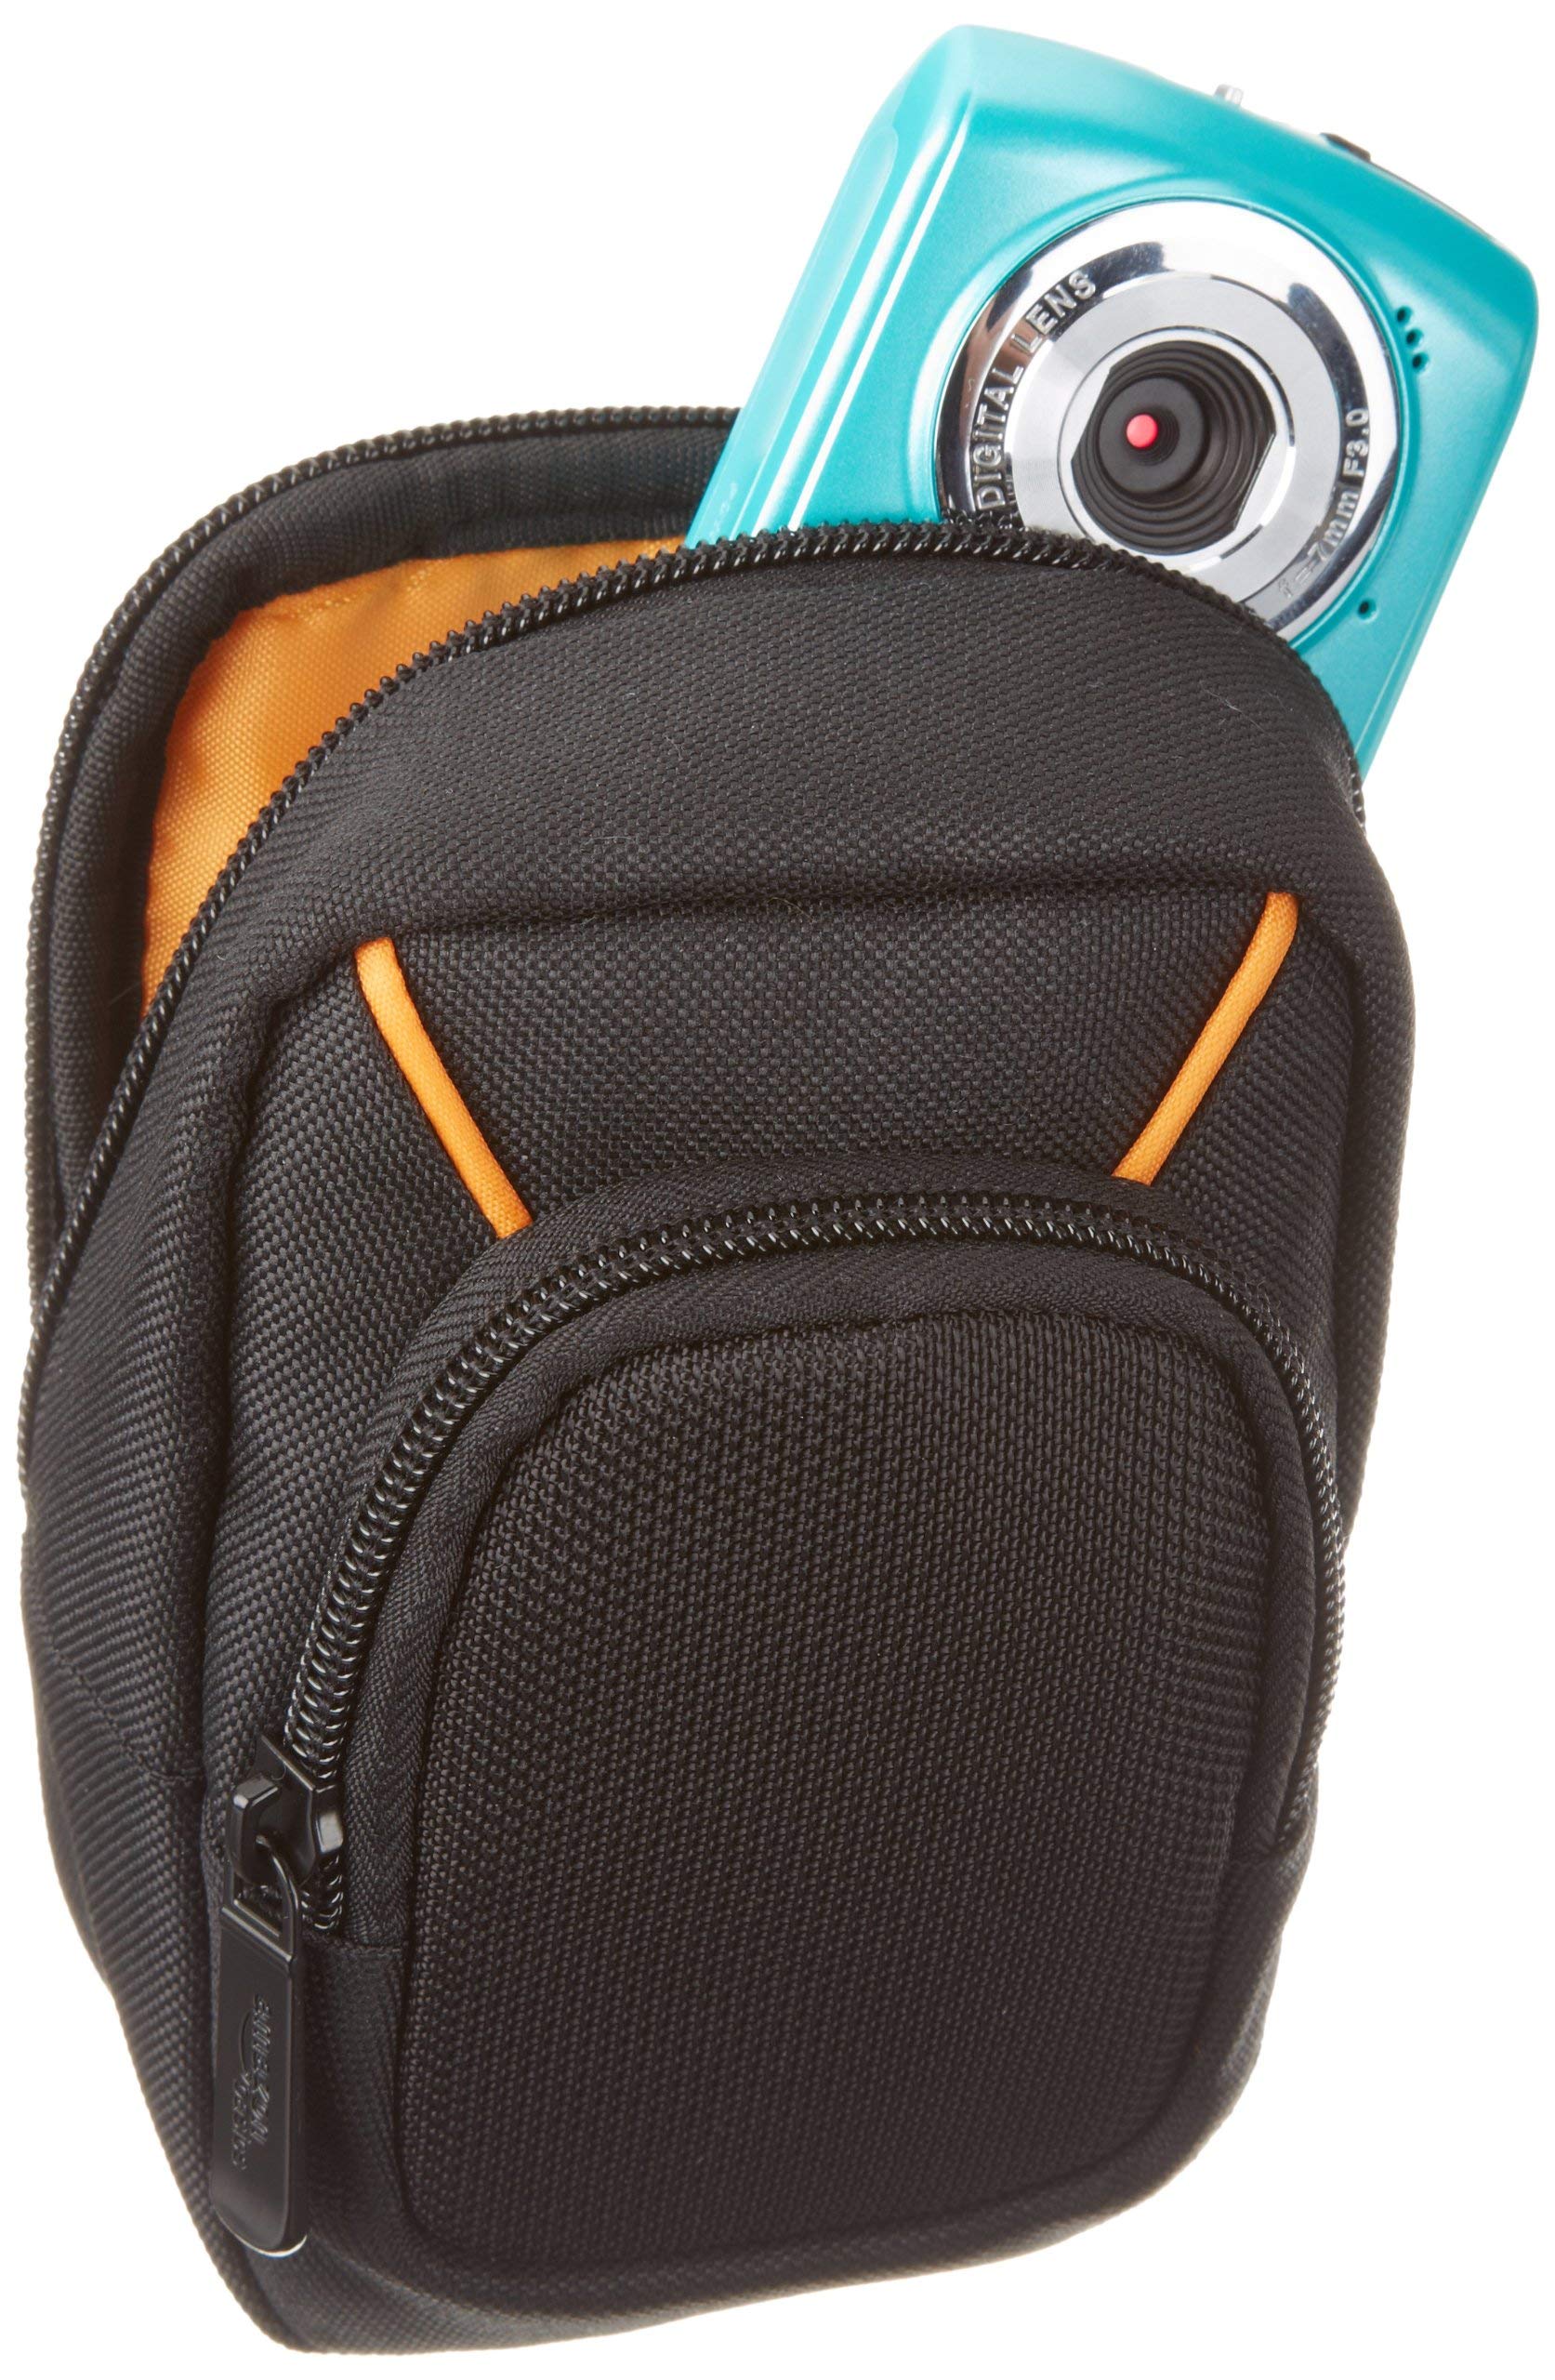 Amazon Basics Large Point and Shoot Camera Case, 6 x 4 x 2 Inches, Black, Solid